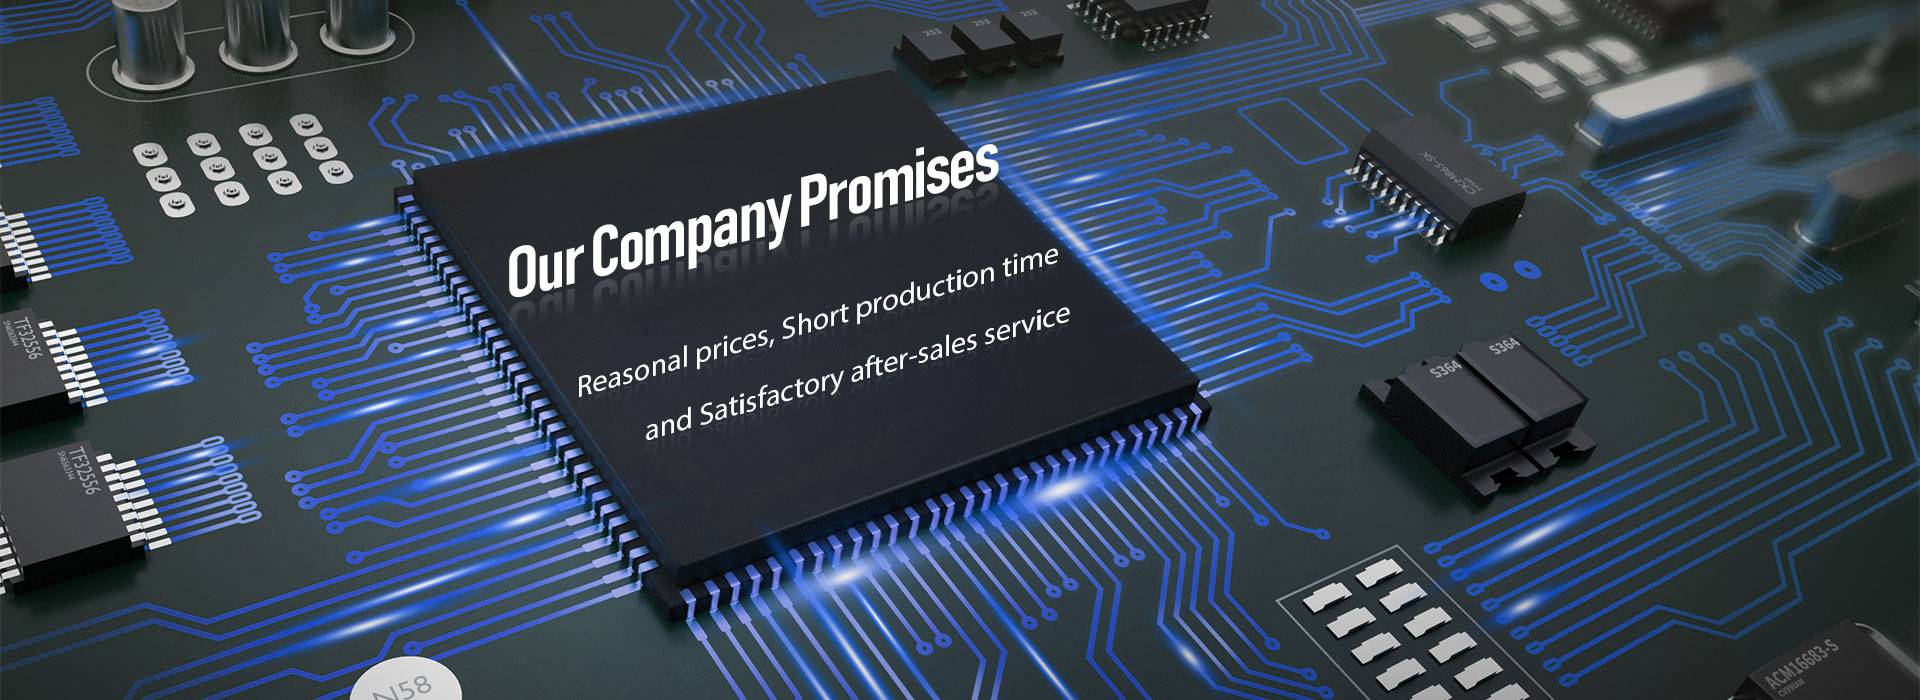 our-company-promises